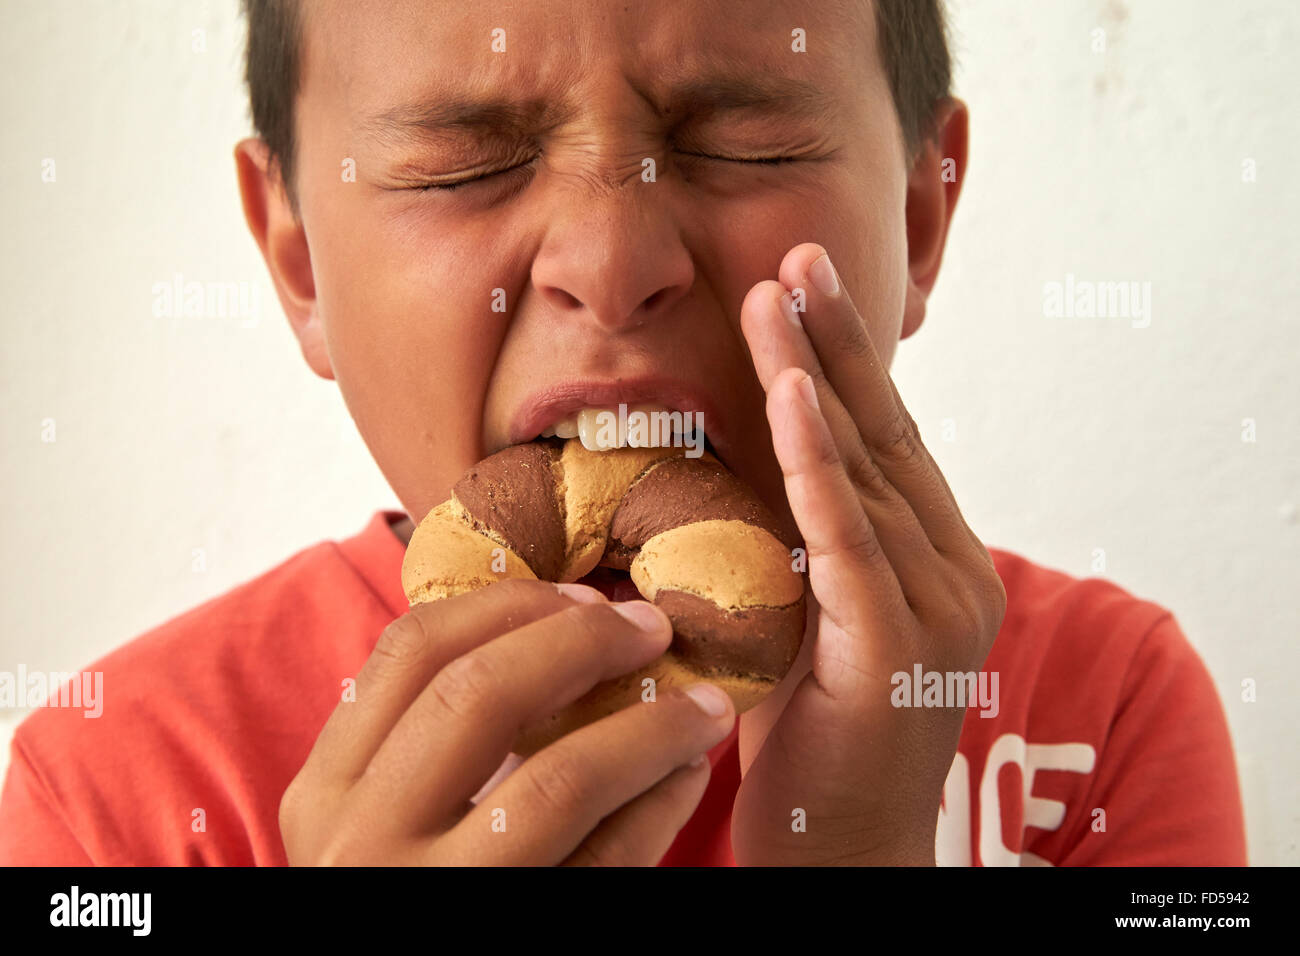 Boy biting into a biscuit and hurting his teeth. Stock Photo